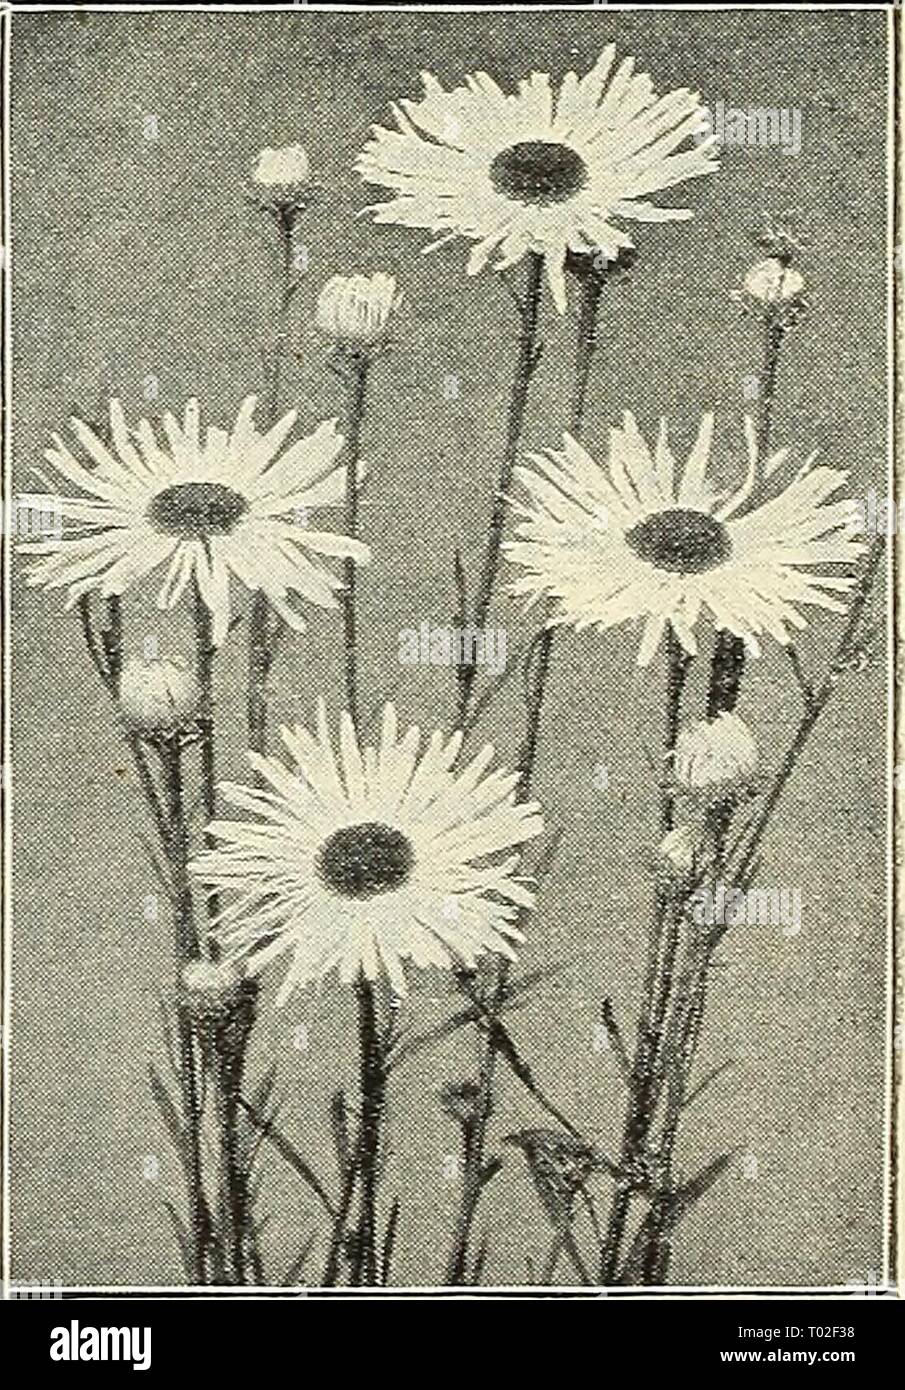 Dreer's garden calendar : 1903 . dreersgardencale1903henr Year: 1903  RARE HARDY ASTER. Grandiflorus, The finest of all and distinct in character and flower from all others. The flowers fre- quently measure 2 inches in diam- eter, are of a lovely violet-blue. It is the latest-flowering variety in cultivation — November — and by lifting the plants can be flowered ir&gt; connection with Chrysanthemums, where its effect is very beautiful. 25 cts. each ; $2 50 per doz. Bocconia Cordata.    Boltonia Latisquama. If yeu wish something unique and different from your neighbors, plant a bed of the New R Stock Photo